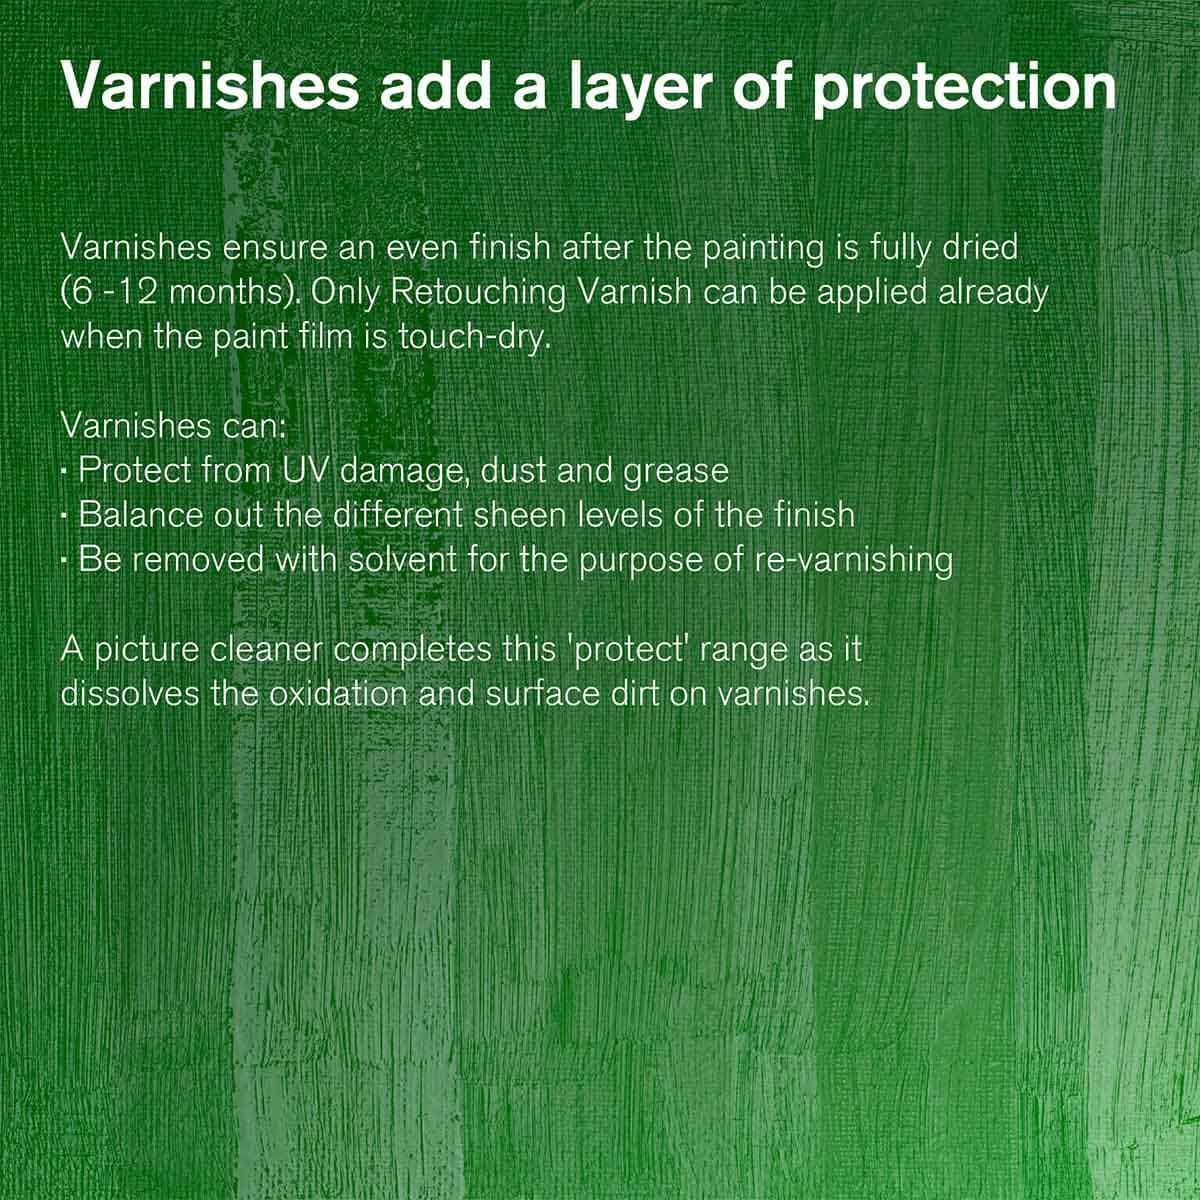 Varnishes add a layer of protection